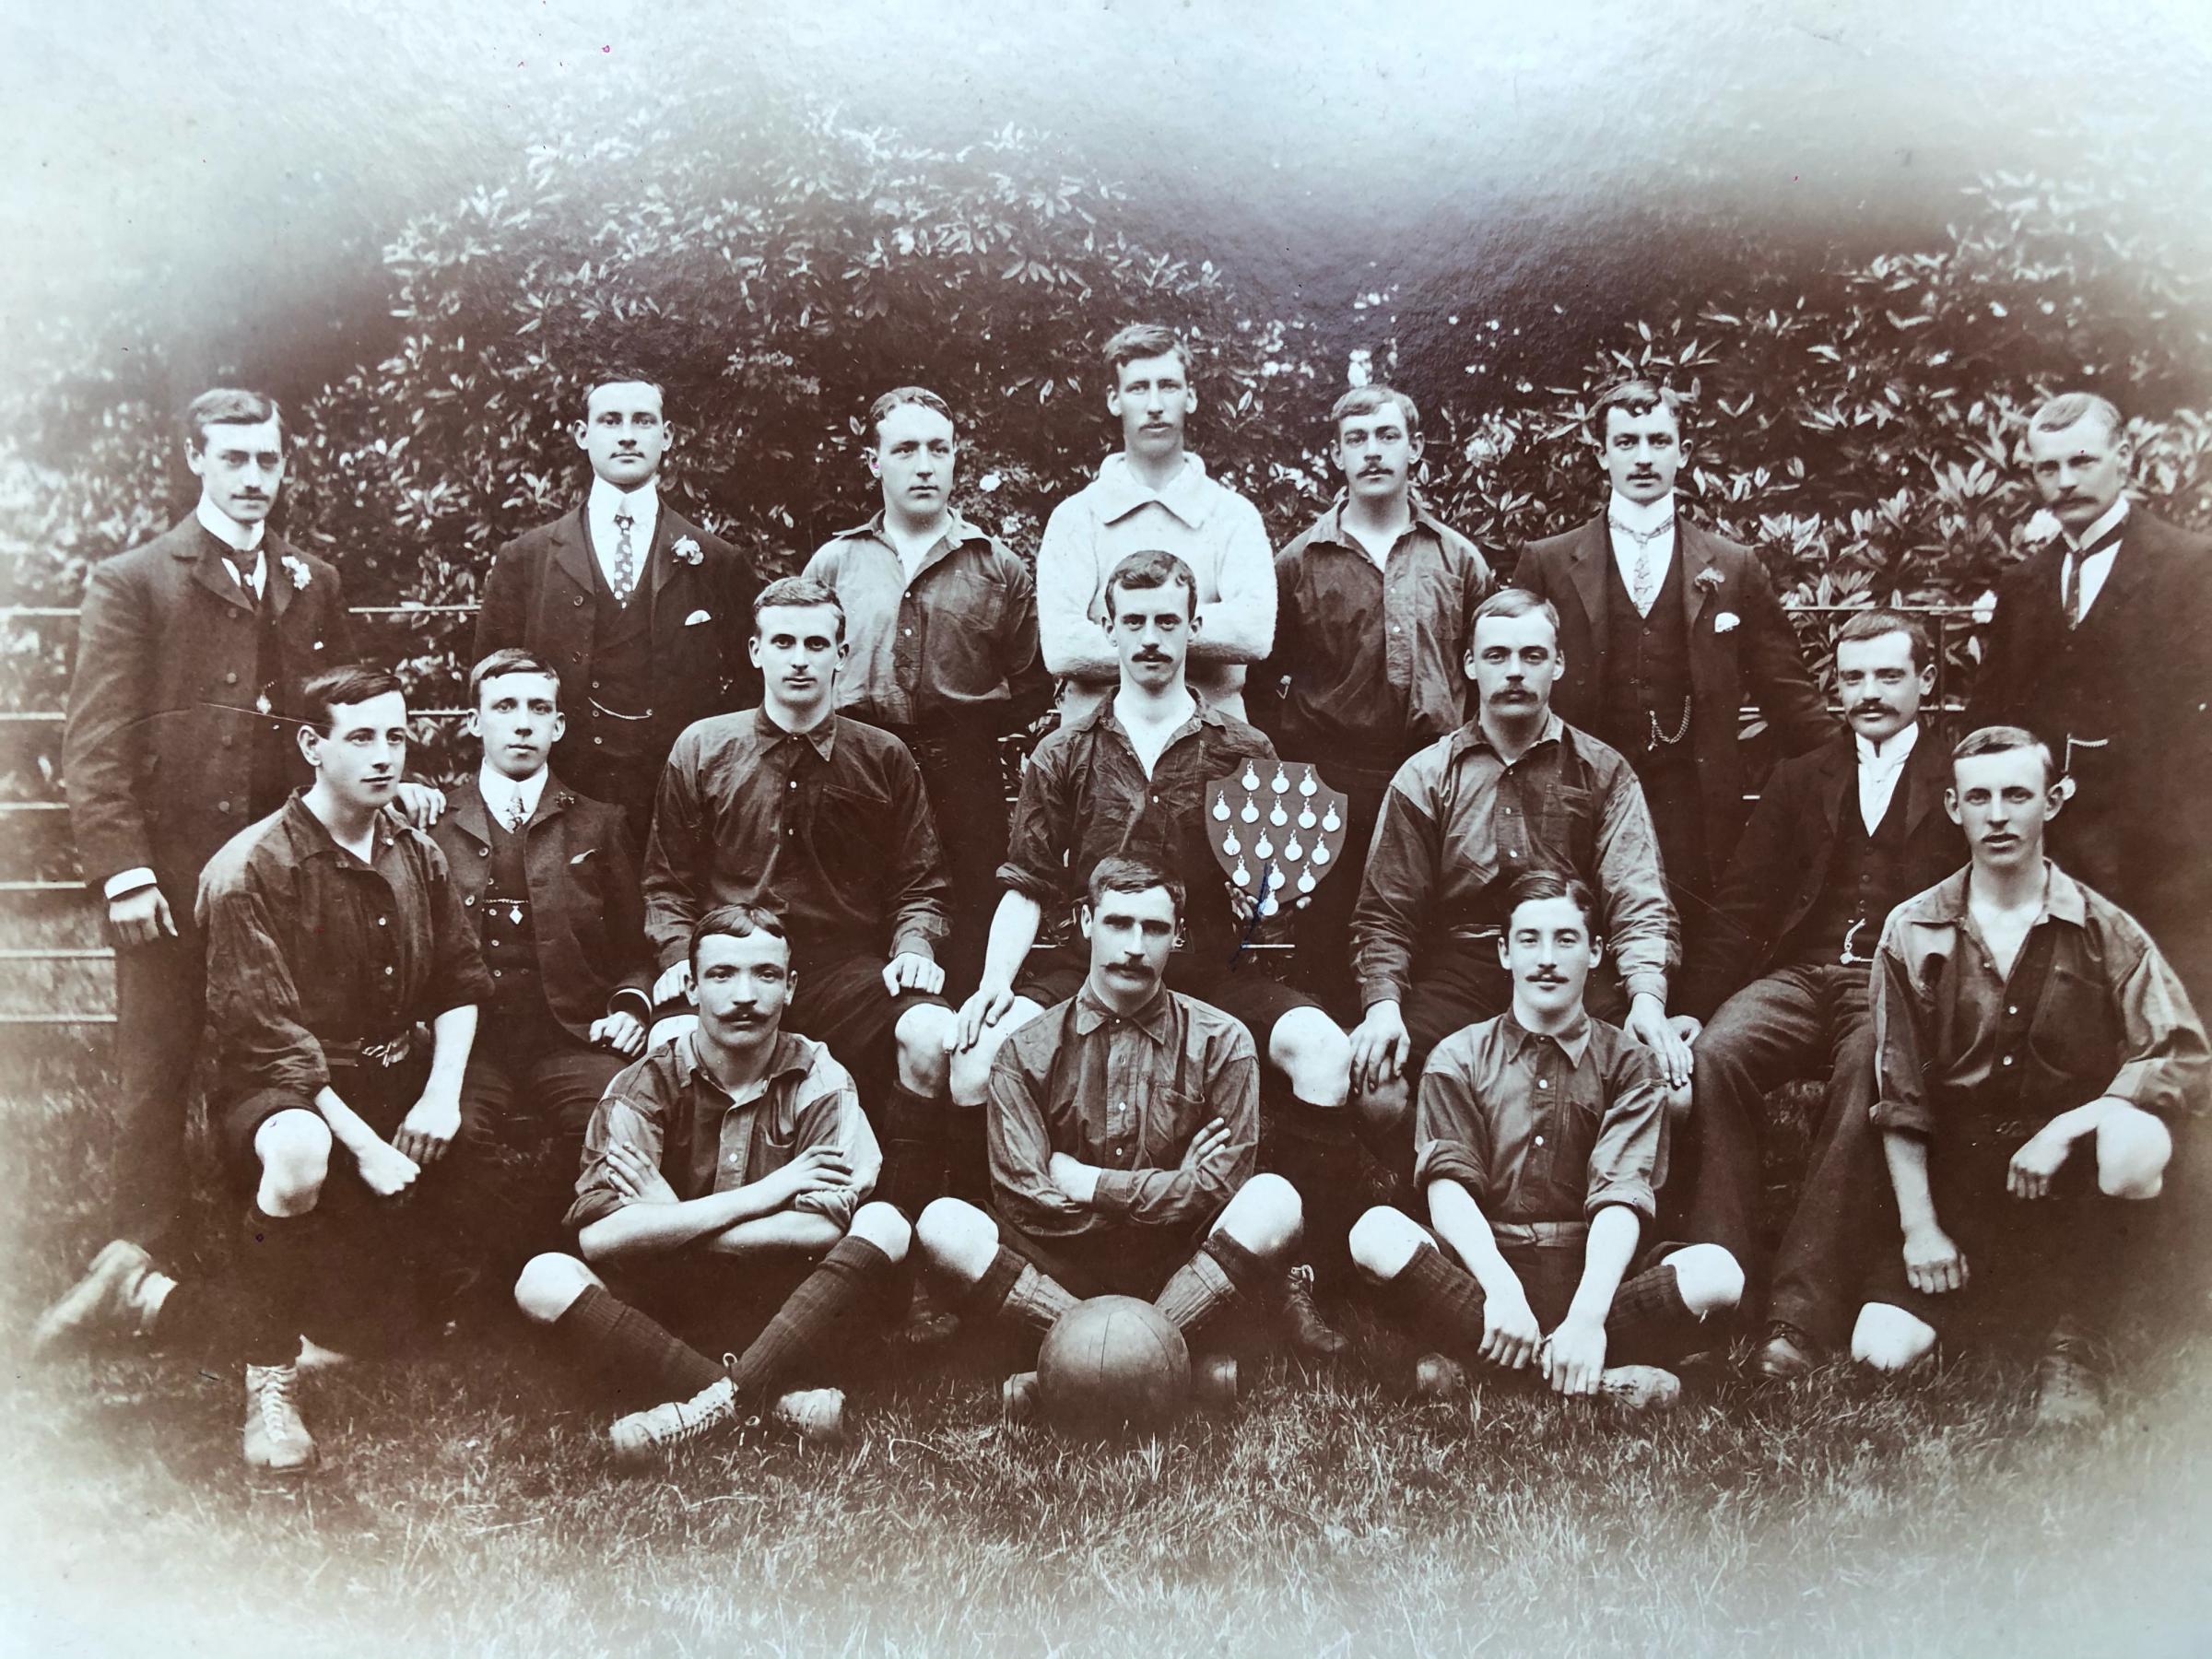 Cranford FC in the early 1900s